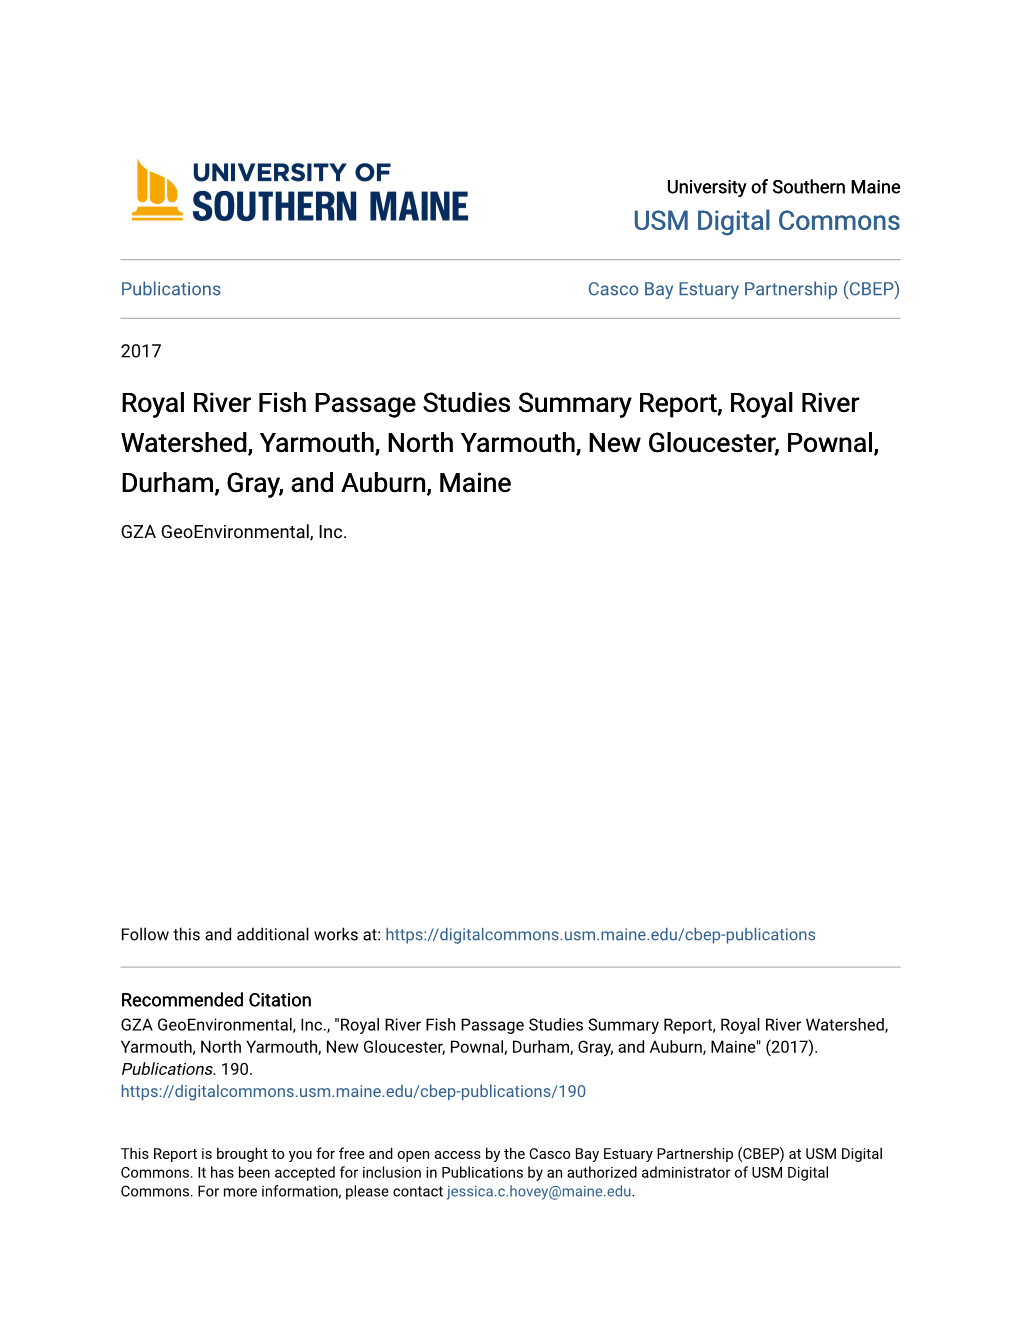 Royal River Fish Passage Studies Summary Report, Royal River Watershed, Yarmouth, North Yarmouth, New Gloucester, Pownal, Durham, Gray, and Auburn, Maine